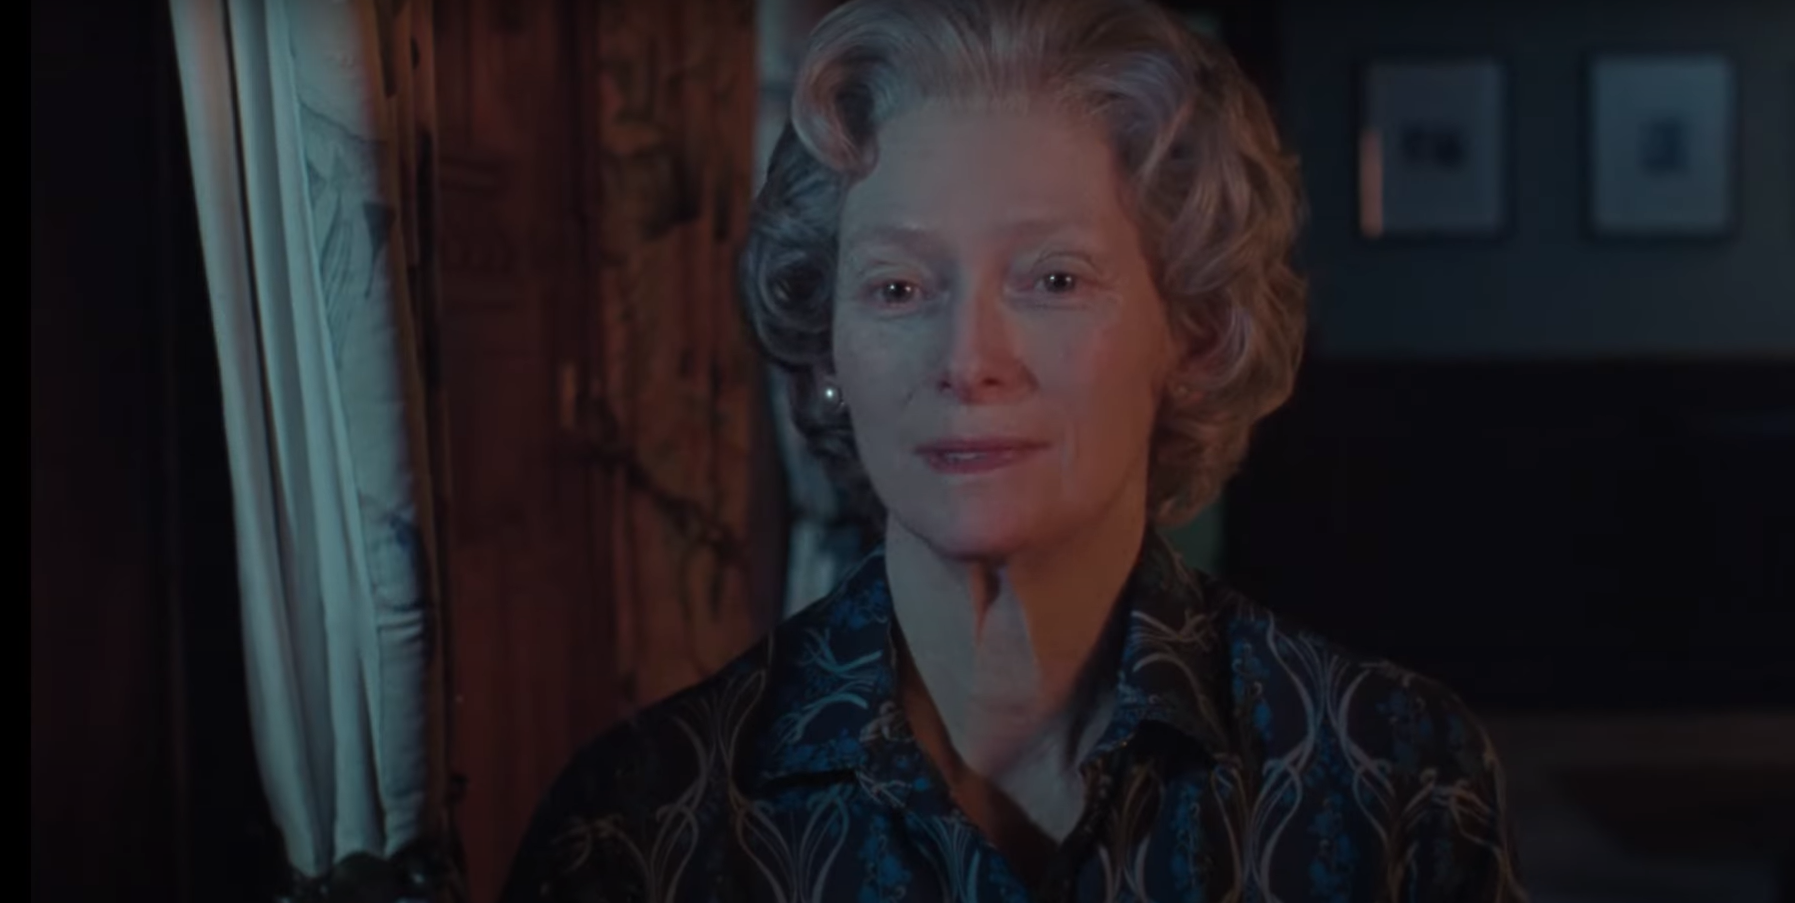 Trailer Watch: Tilda Swinton Takes on Dual Roles in Joanna Hogg’s Ghost Story “The Eternal Daughter”